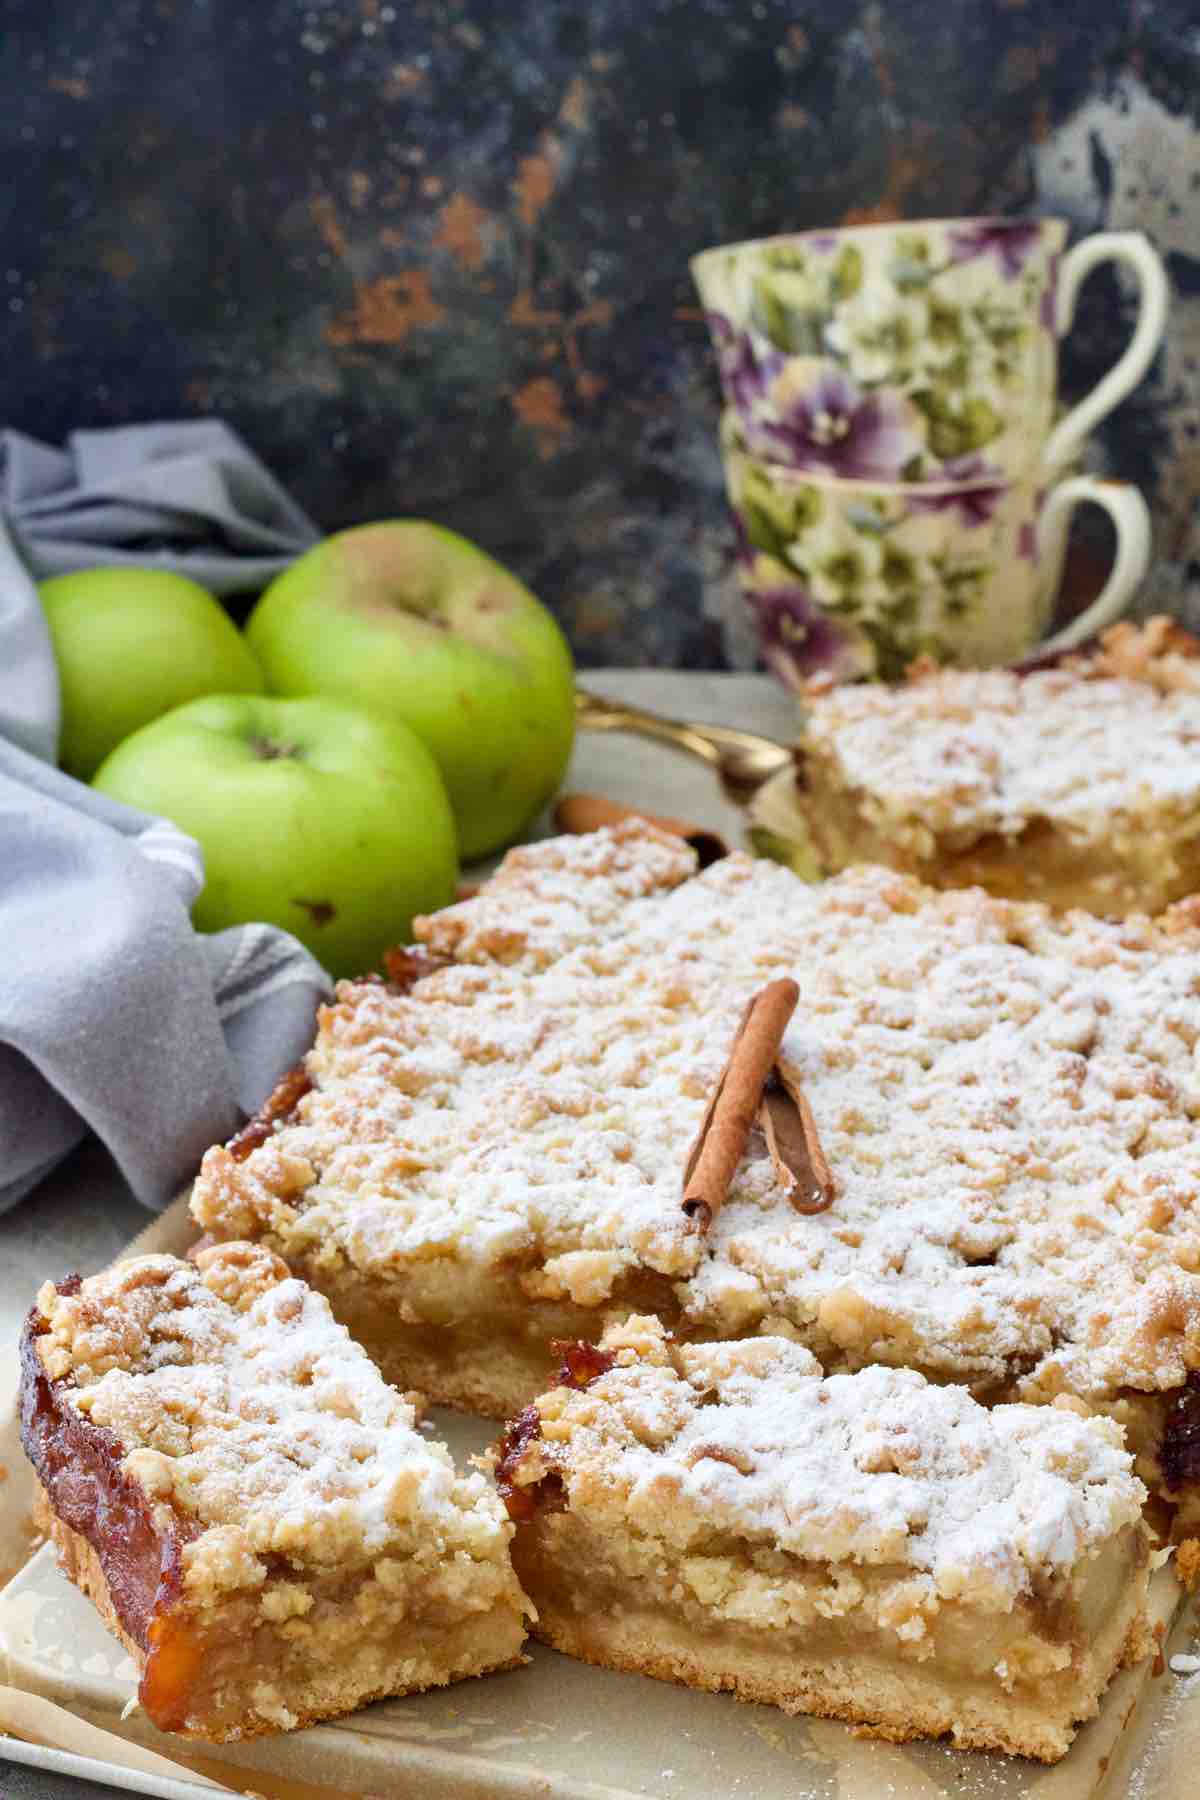 Polish apple cake decorated with cinnamon sticks and with couple of slices cut.